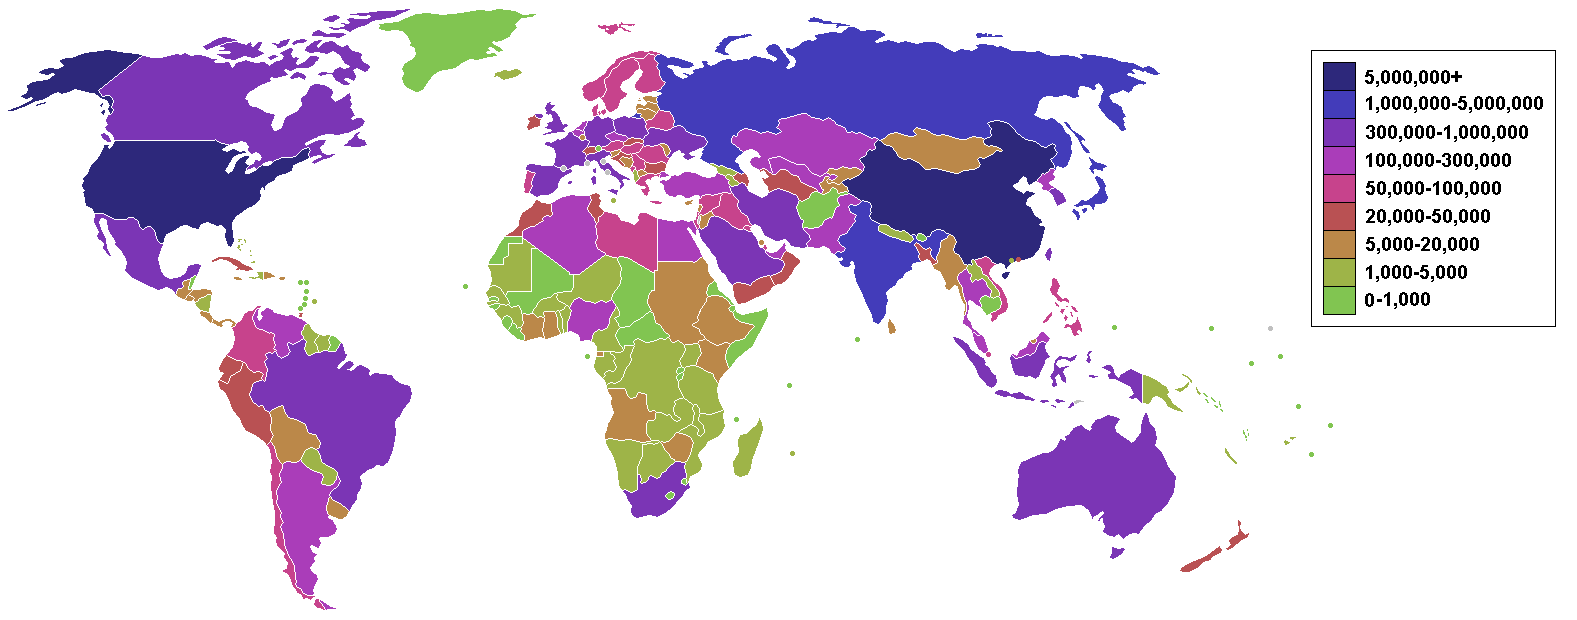 http://upload.wikimedia.org/wikipedia/commons/d/d1/Countries_by_carbon_dioxide_emissions_world_map_deobfuscated.png